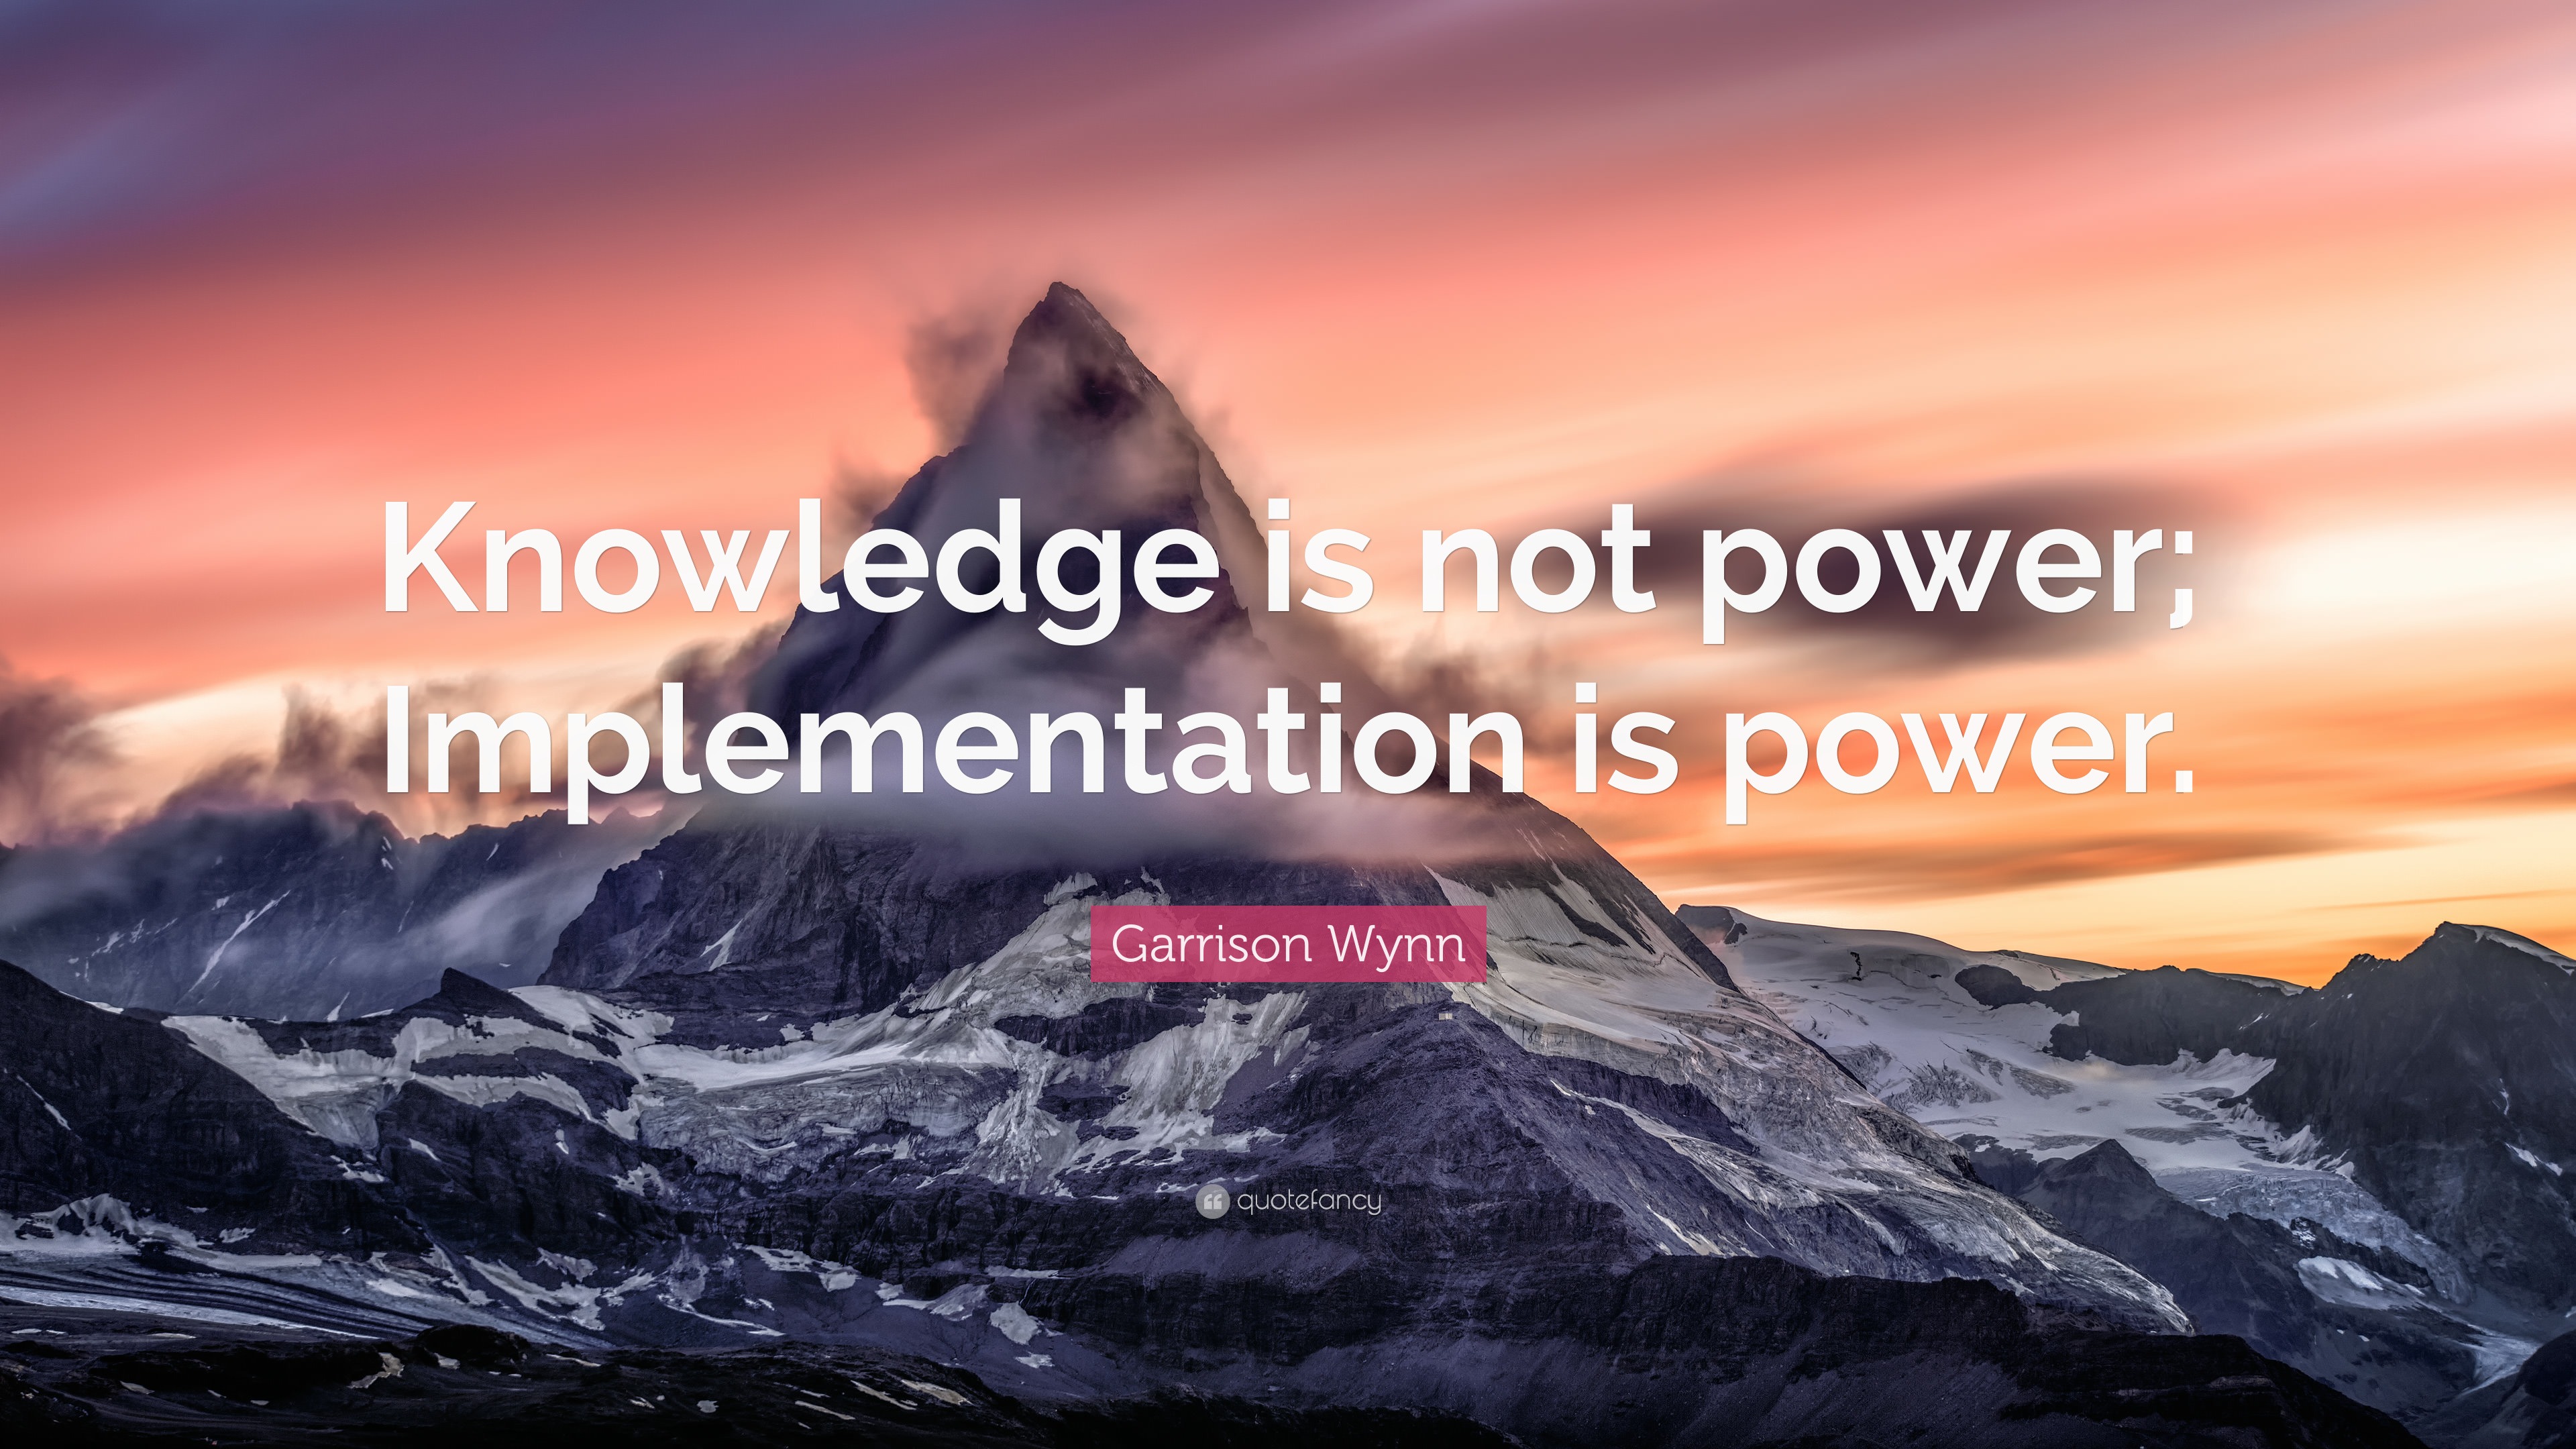 Garrison Wynn Quote: “Knowledge is not power; Implementation is power.”